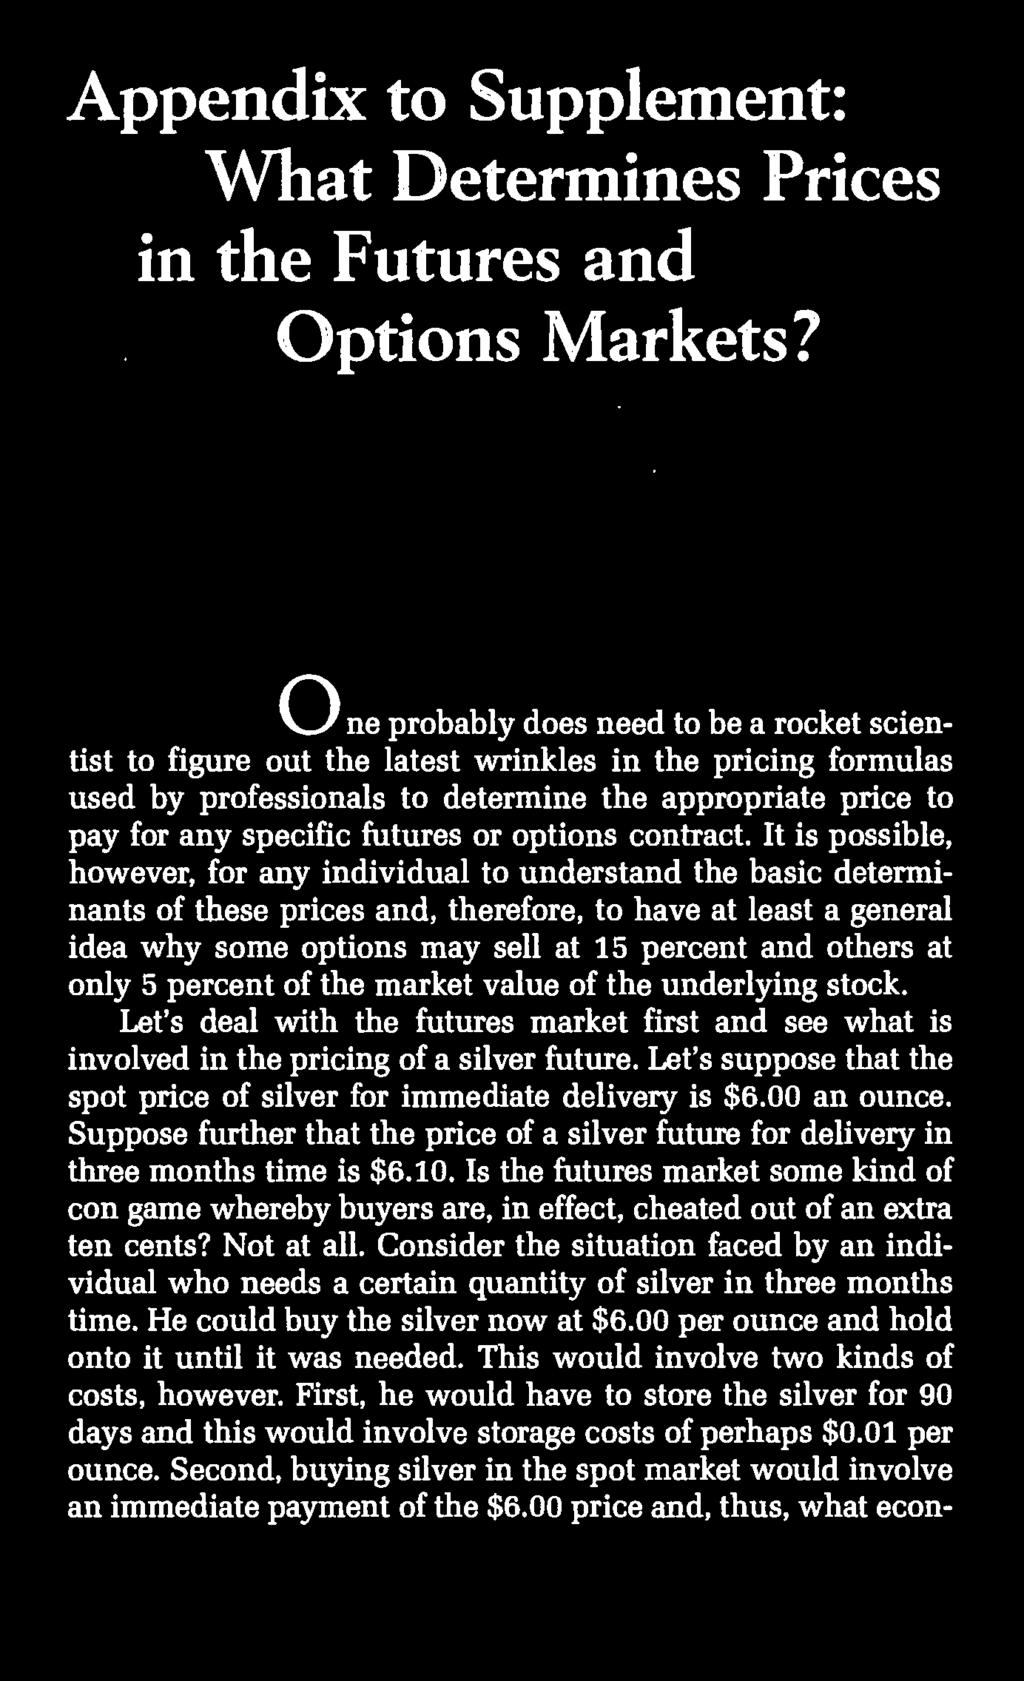 options contract.